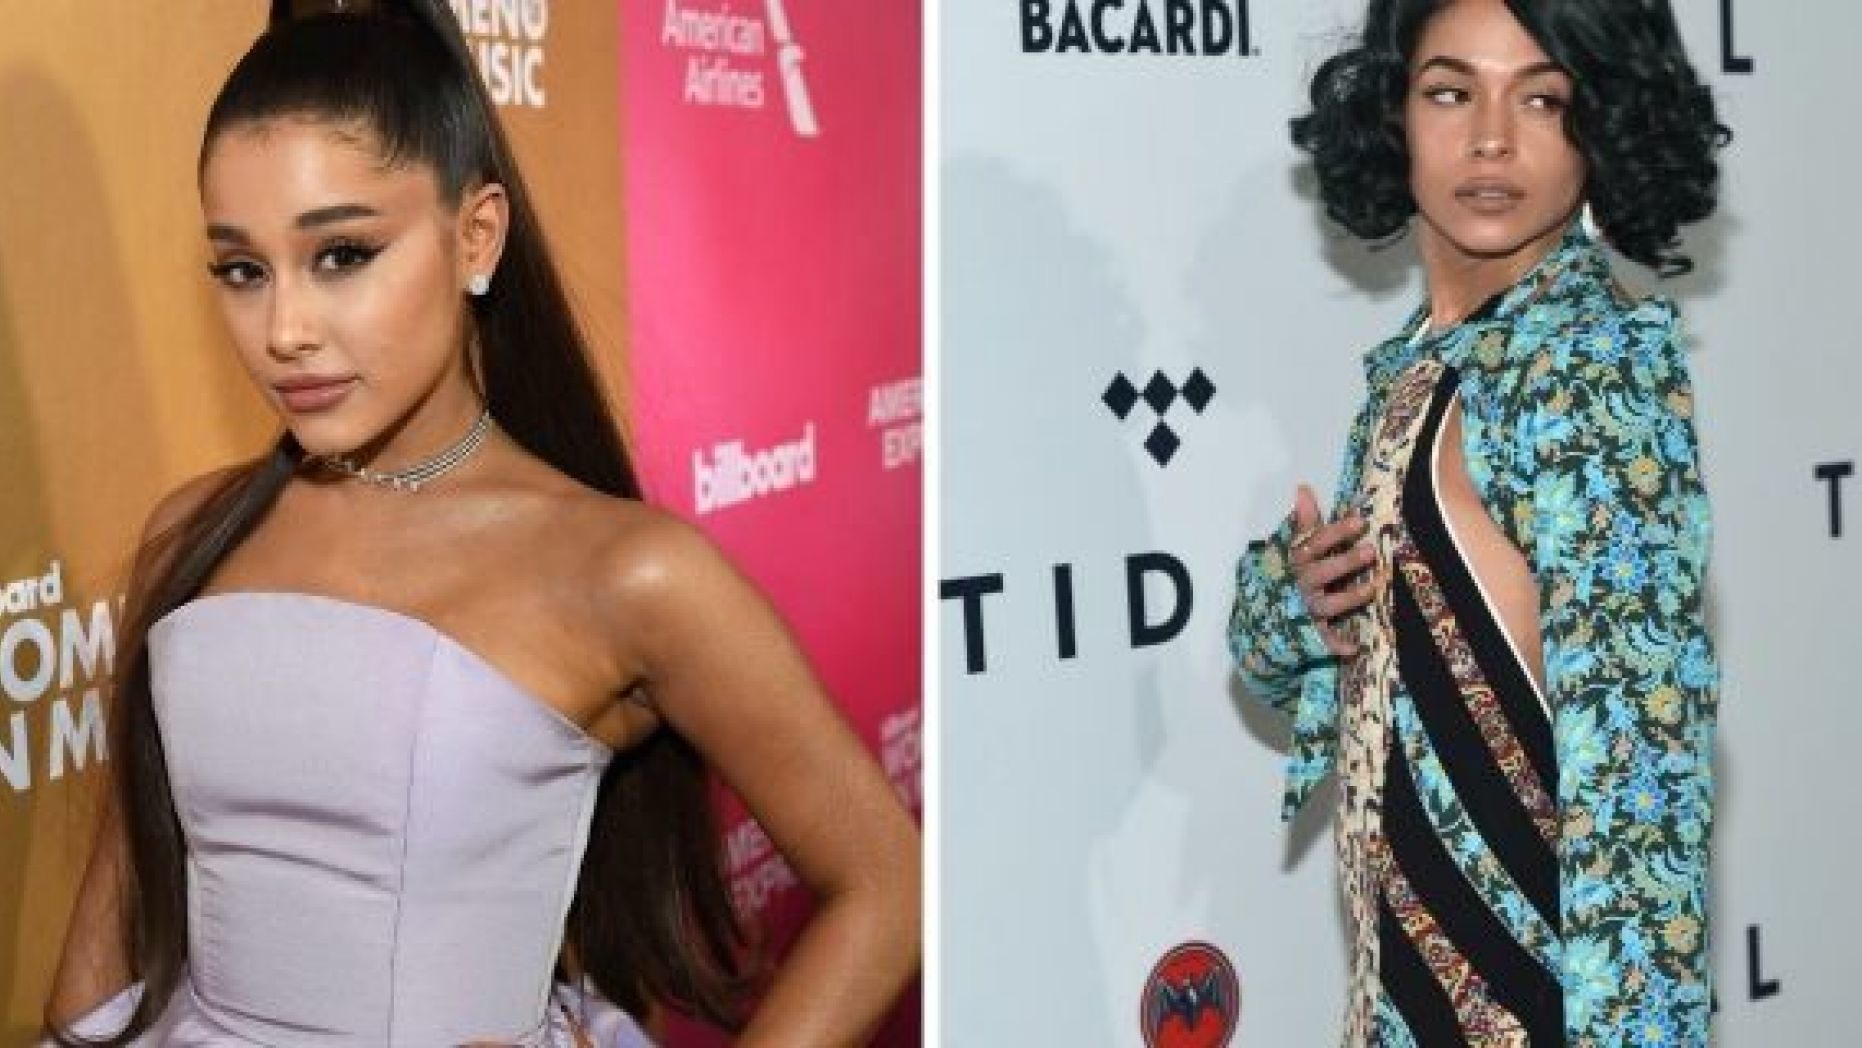 Princess Nokia [right] has accused Ariana Grande [left] of copying her track after she dropped her latest song "7 Rings."